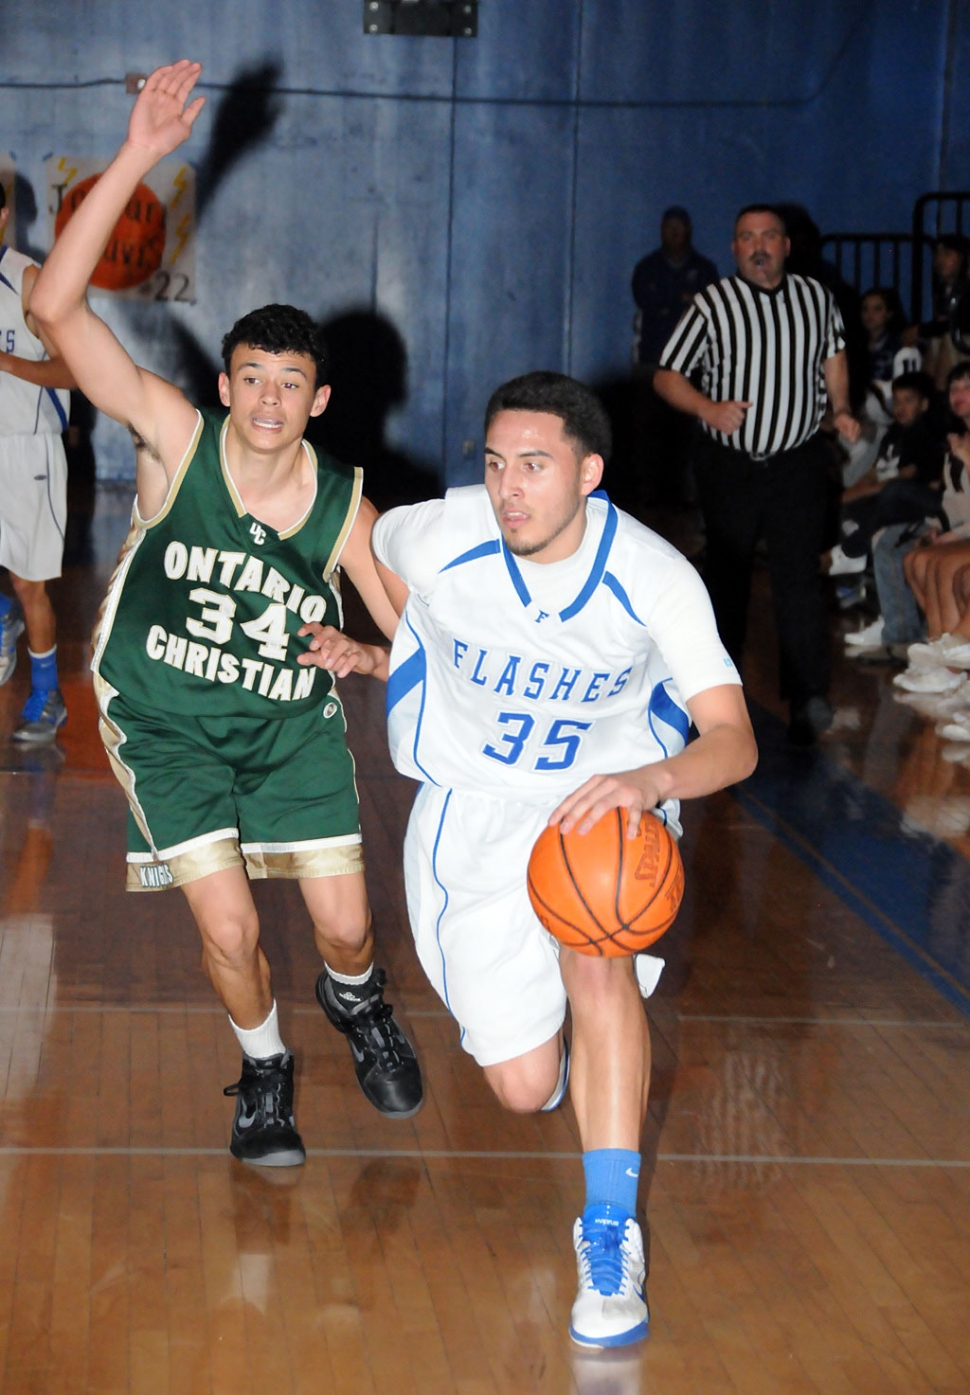 Fillmore played against Onatario Christian last Friday night. Fillmore was ahead 34-30 at half time. But wasn’t able to hold them and lost in the 4th quarter 61-67. Chris DeLa Paz above scored 26 points and had 9 rebounds.